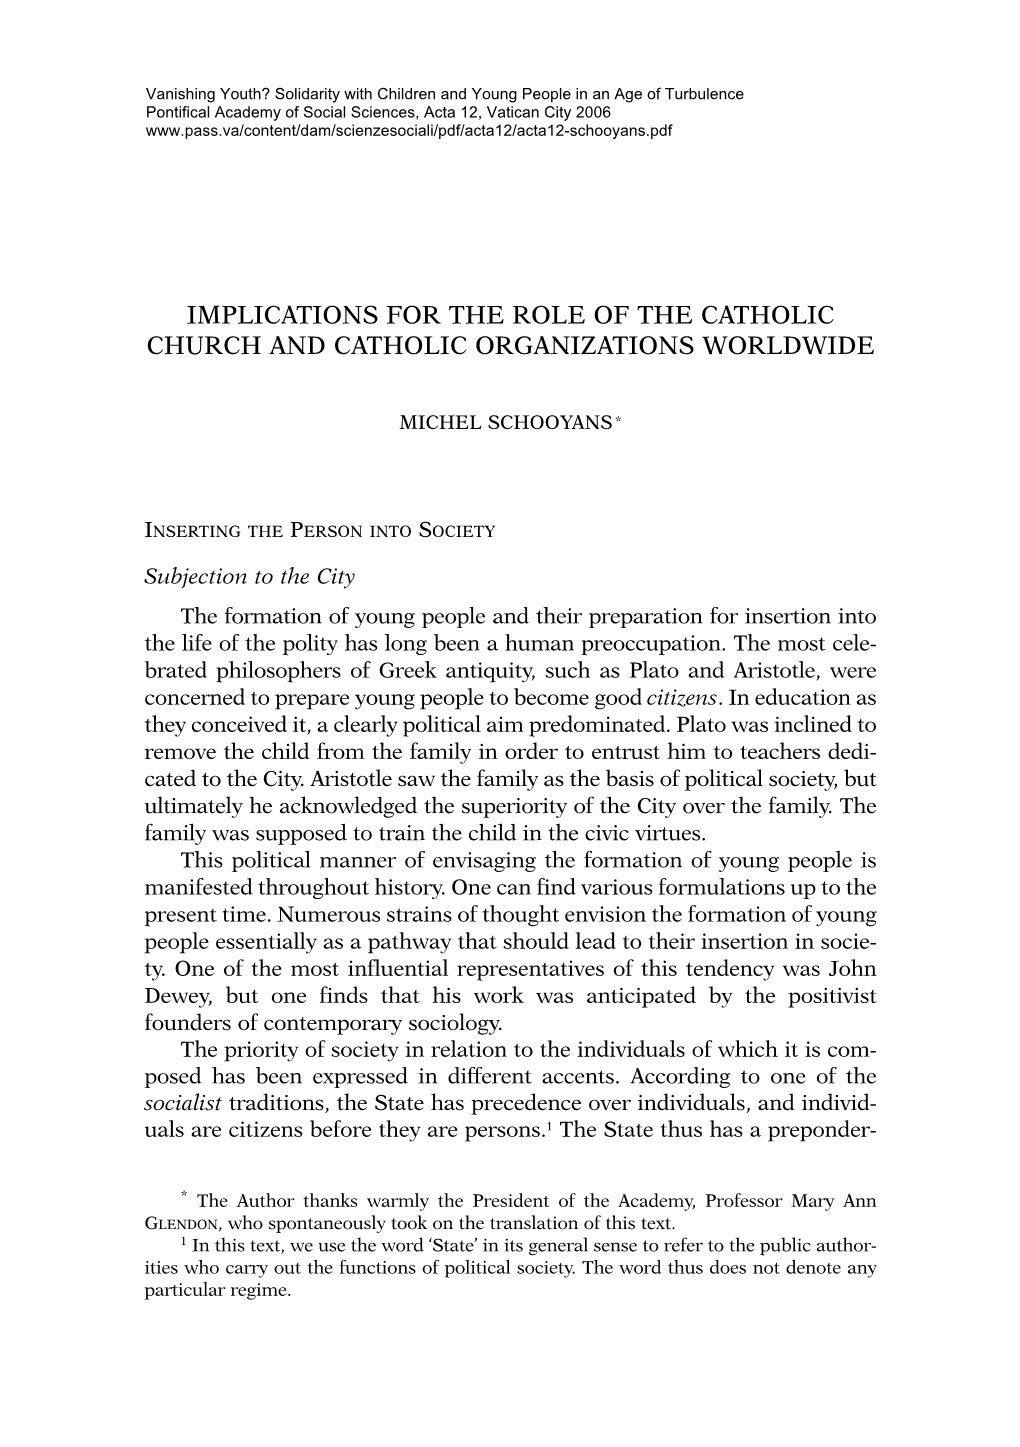 Implications for the Role of the Catholic Church and Catholic Organizations Worldwide